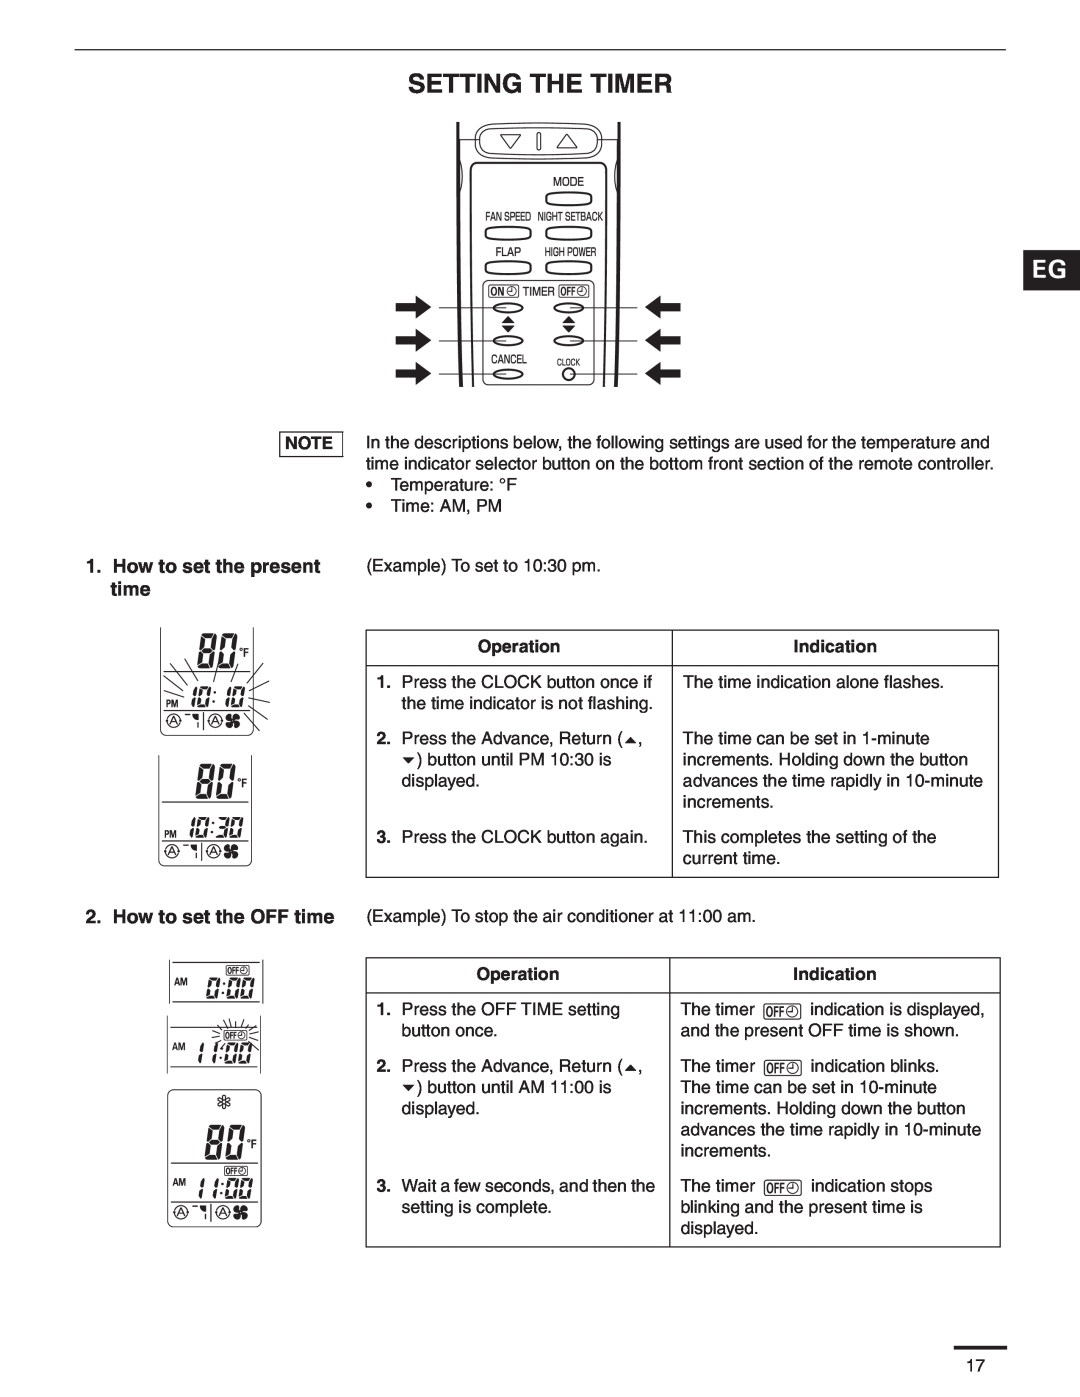 Panasonic CS-MKS9NKU, CS-MKS7NKU, CS-MKS12NKU appendix Setting The Timer, How to set the present time 